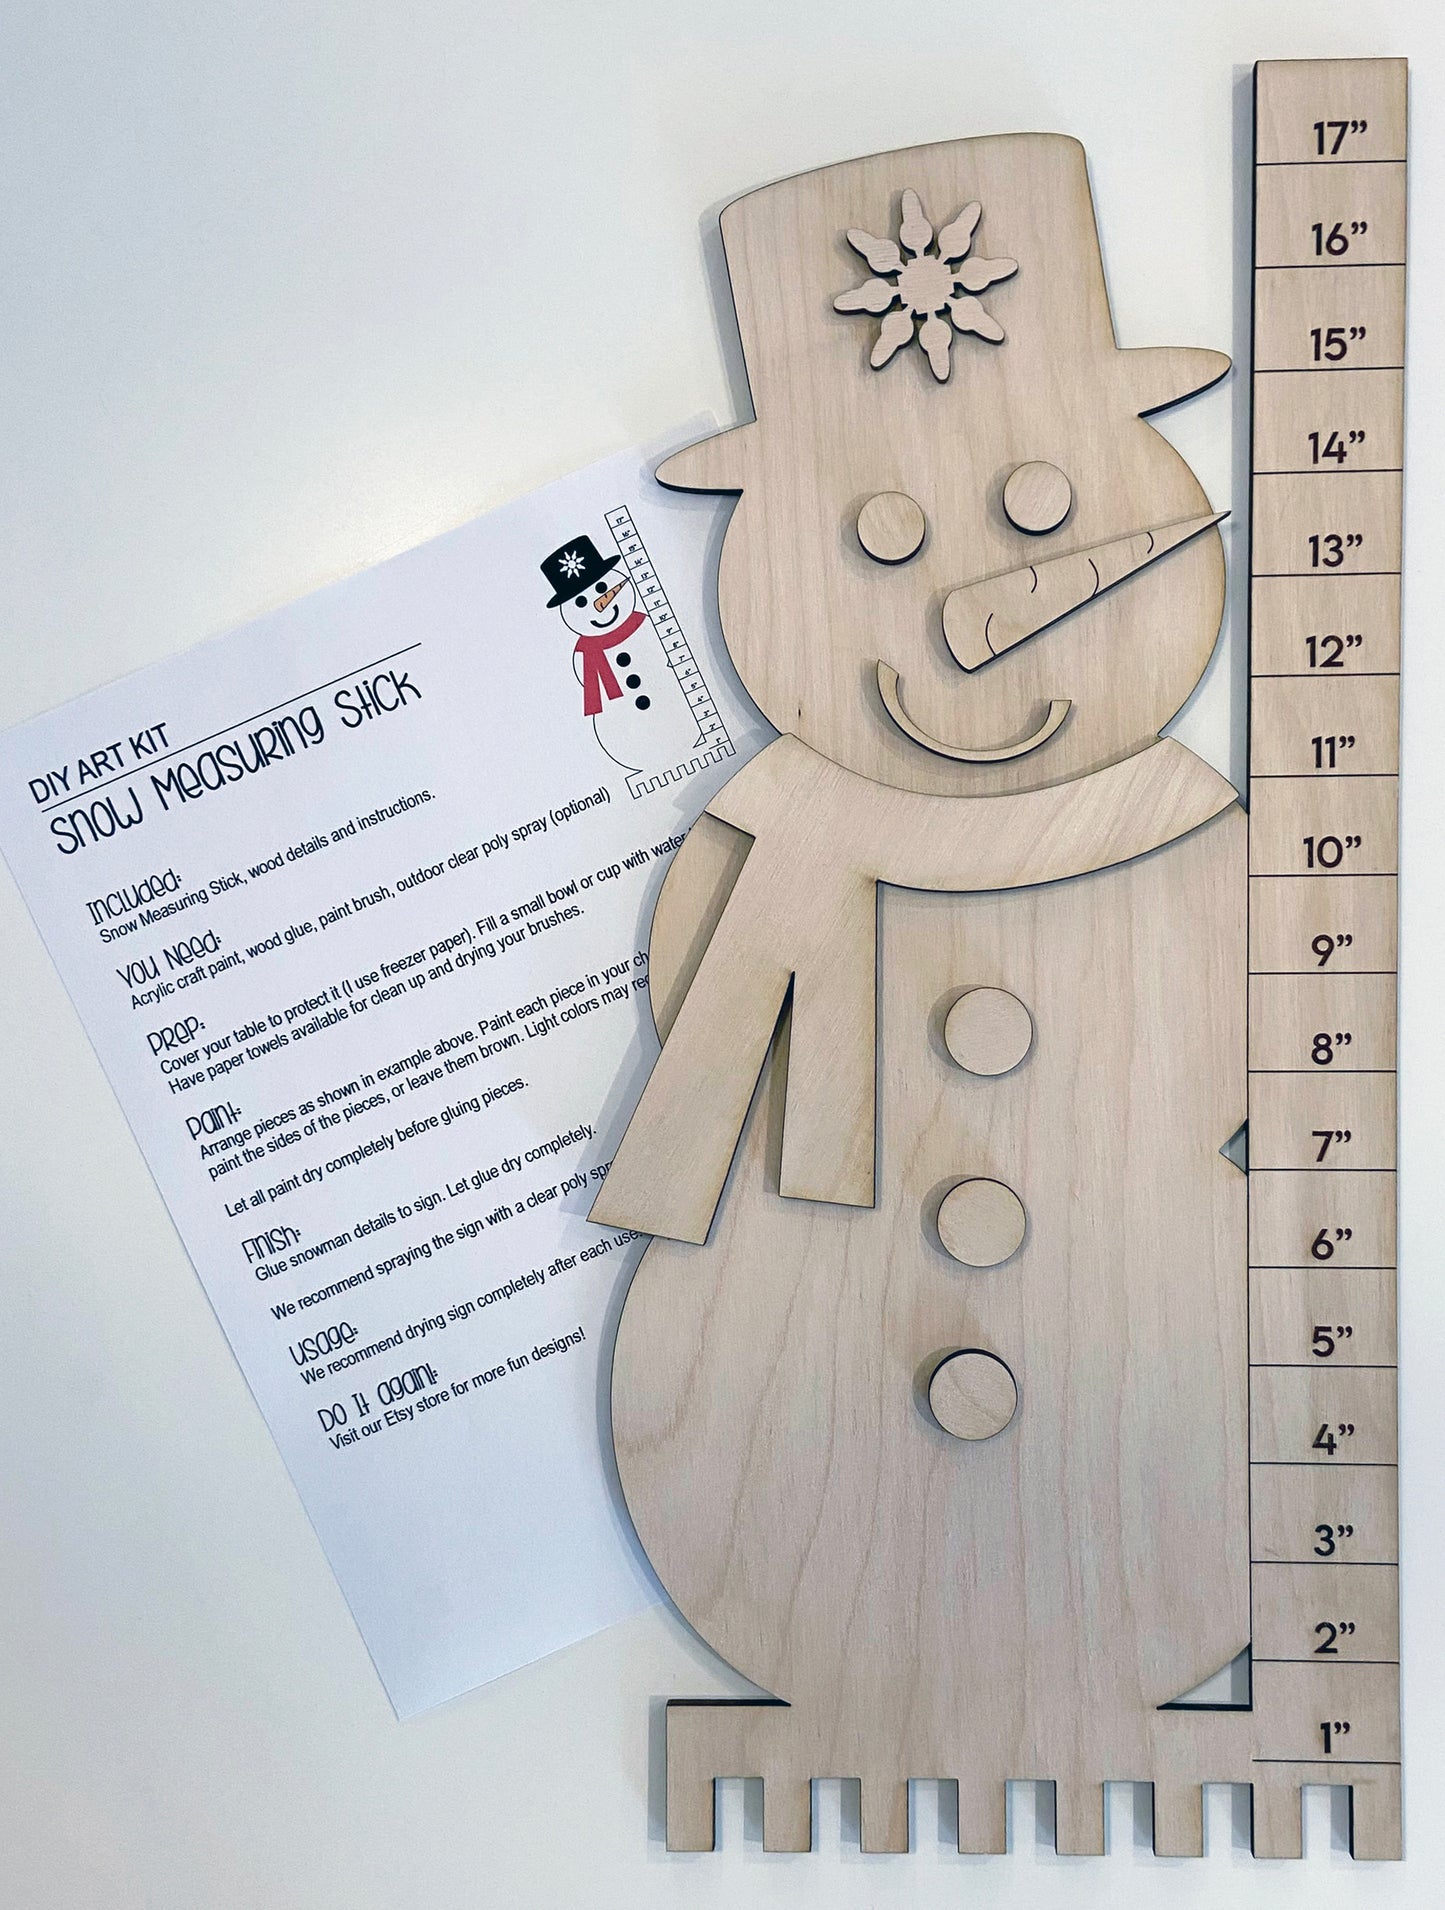 Snowman with Snow Ruler - Ready to Paint